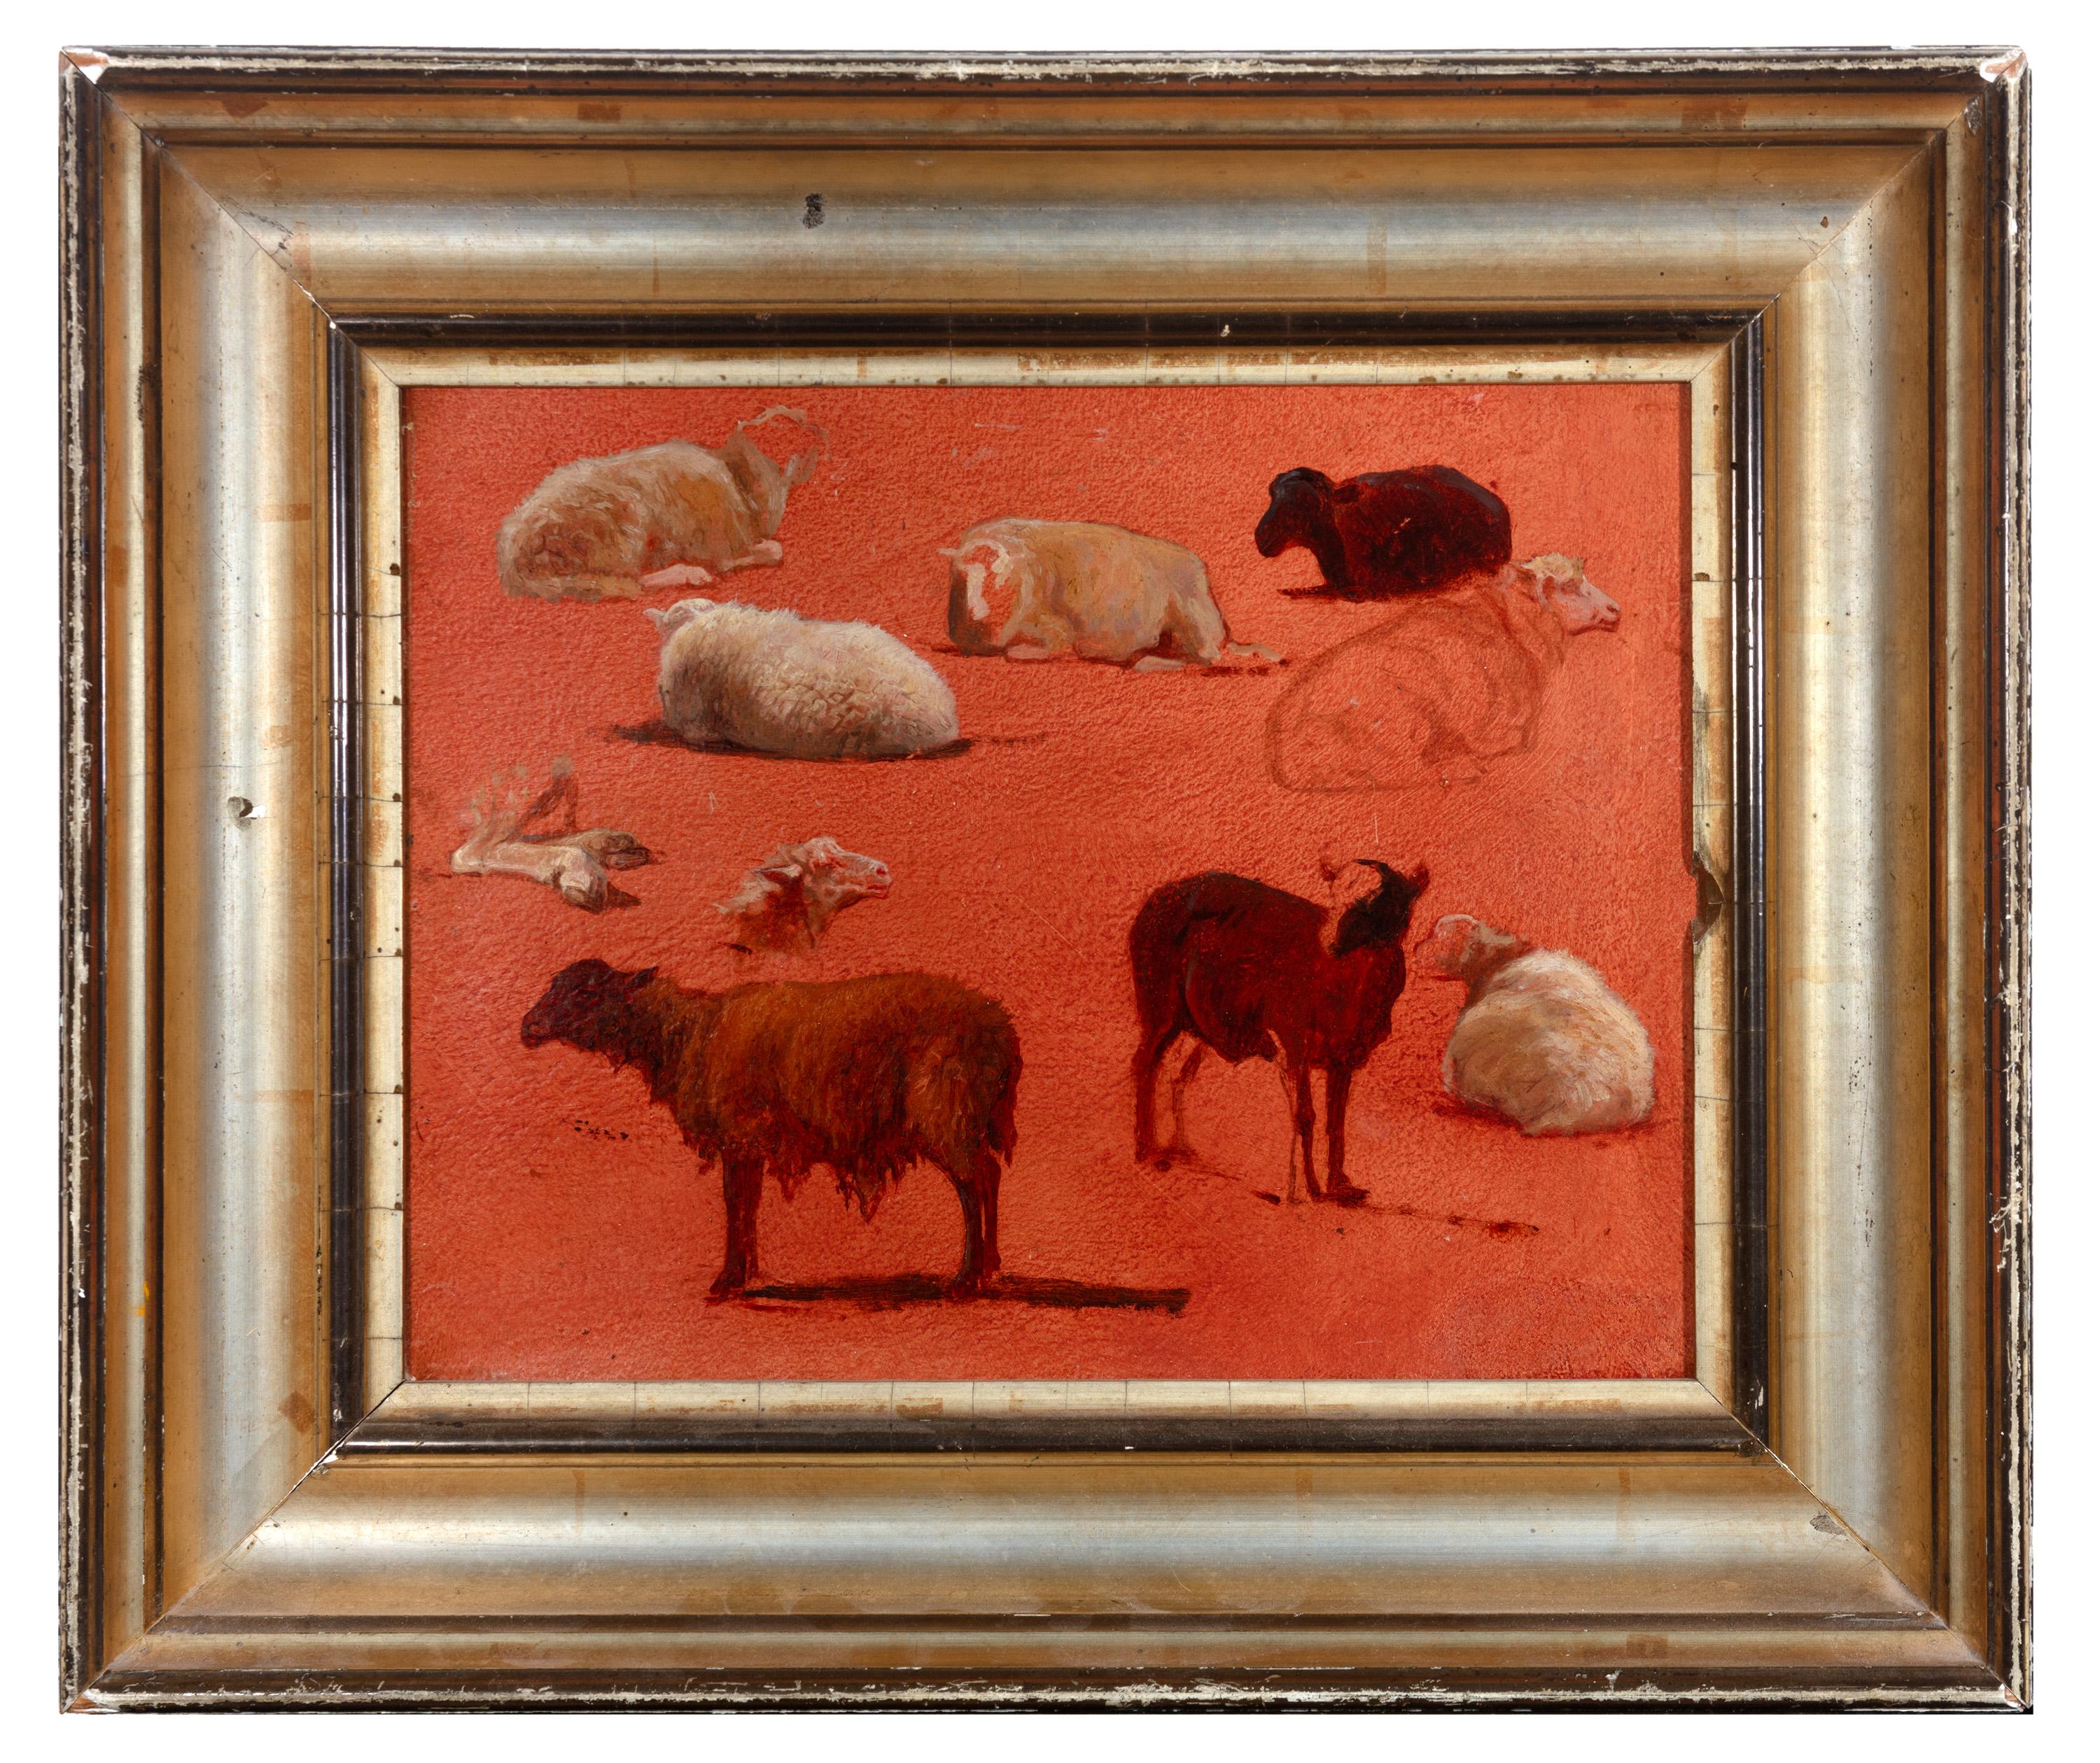 19th century female artist French realism oil painting sheep sketches animals